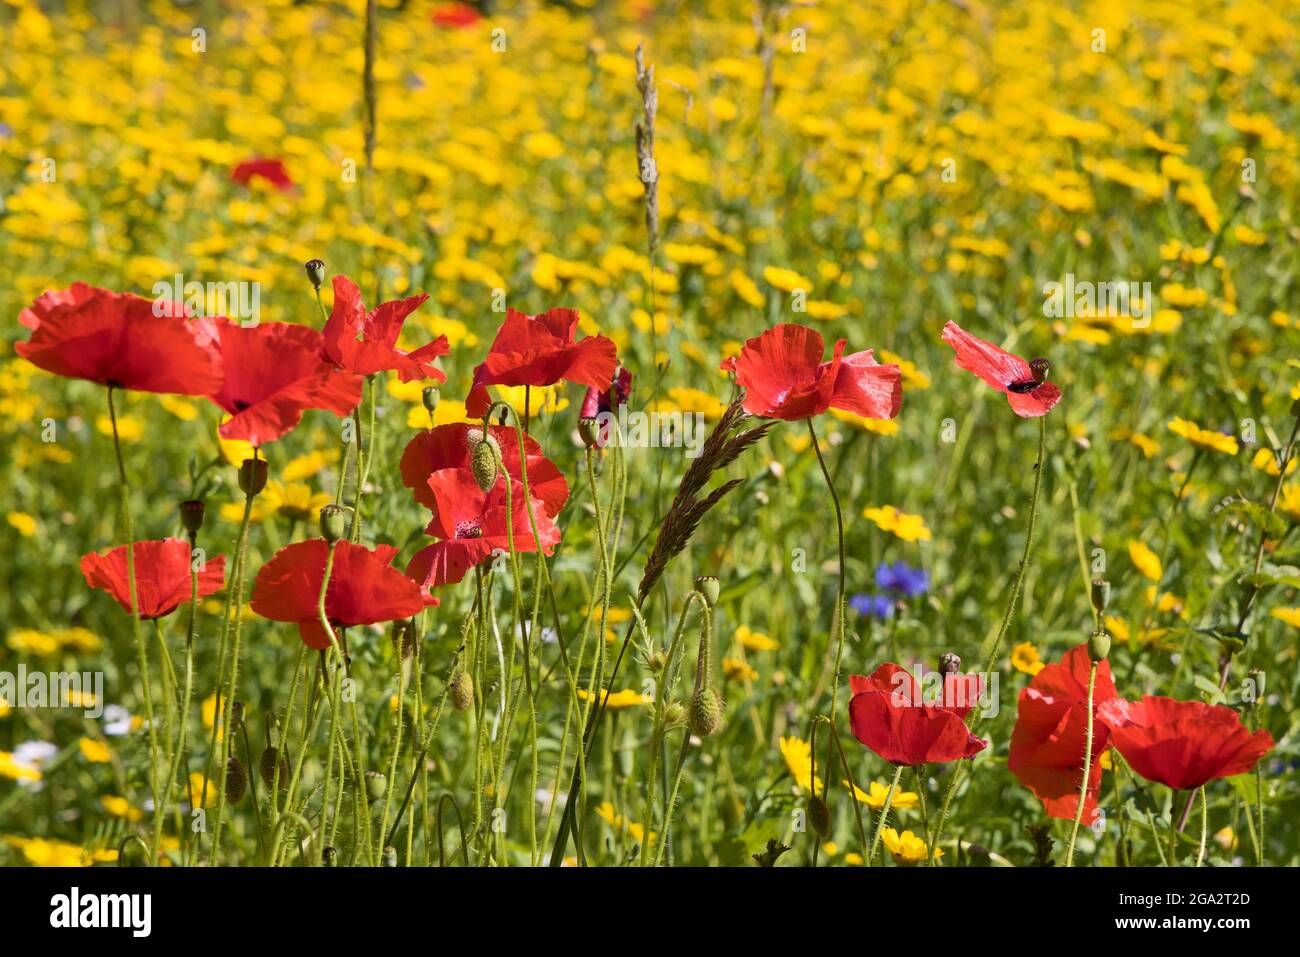 Red poppies in a field of yellow daisies. Summertime in Norfolk, UK. Stock Photo